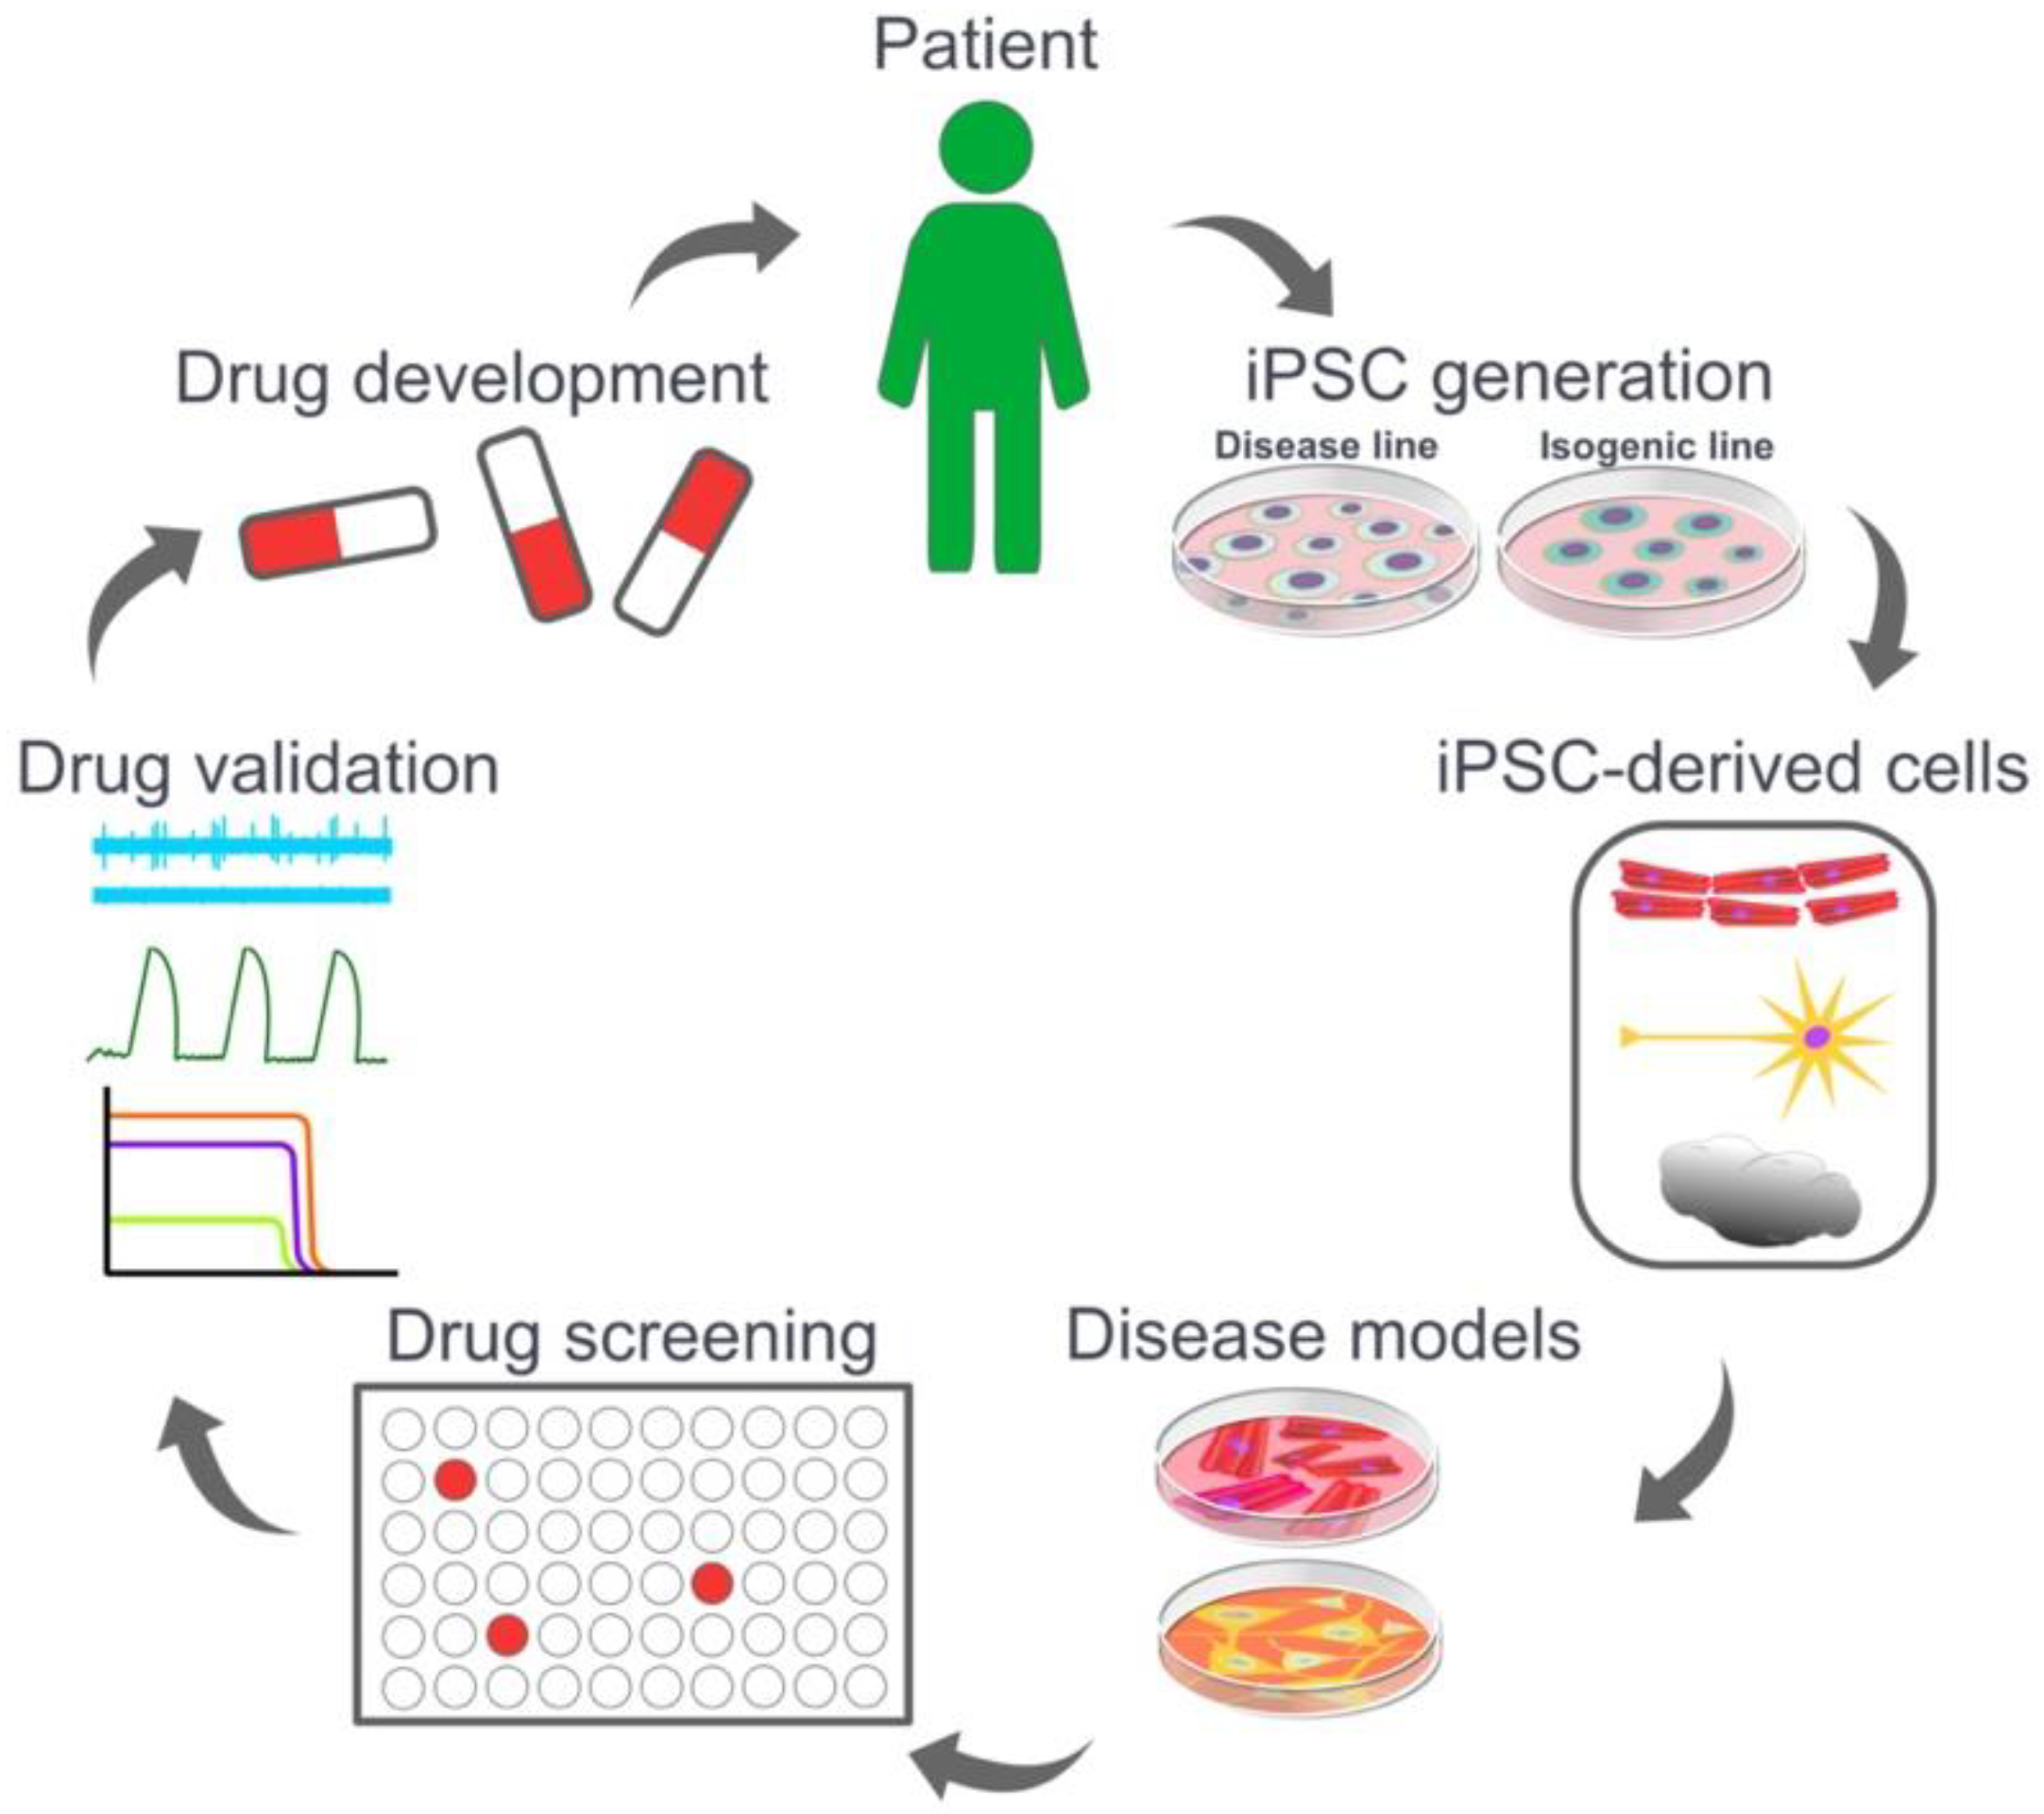 Cells | Free Full-Text | Utility of iPSC-Derived Cells for Disease Modeling, Drug Development, and Cell Therapy